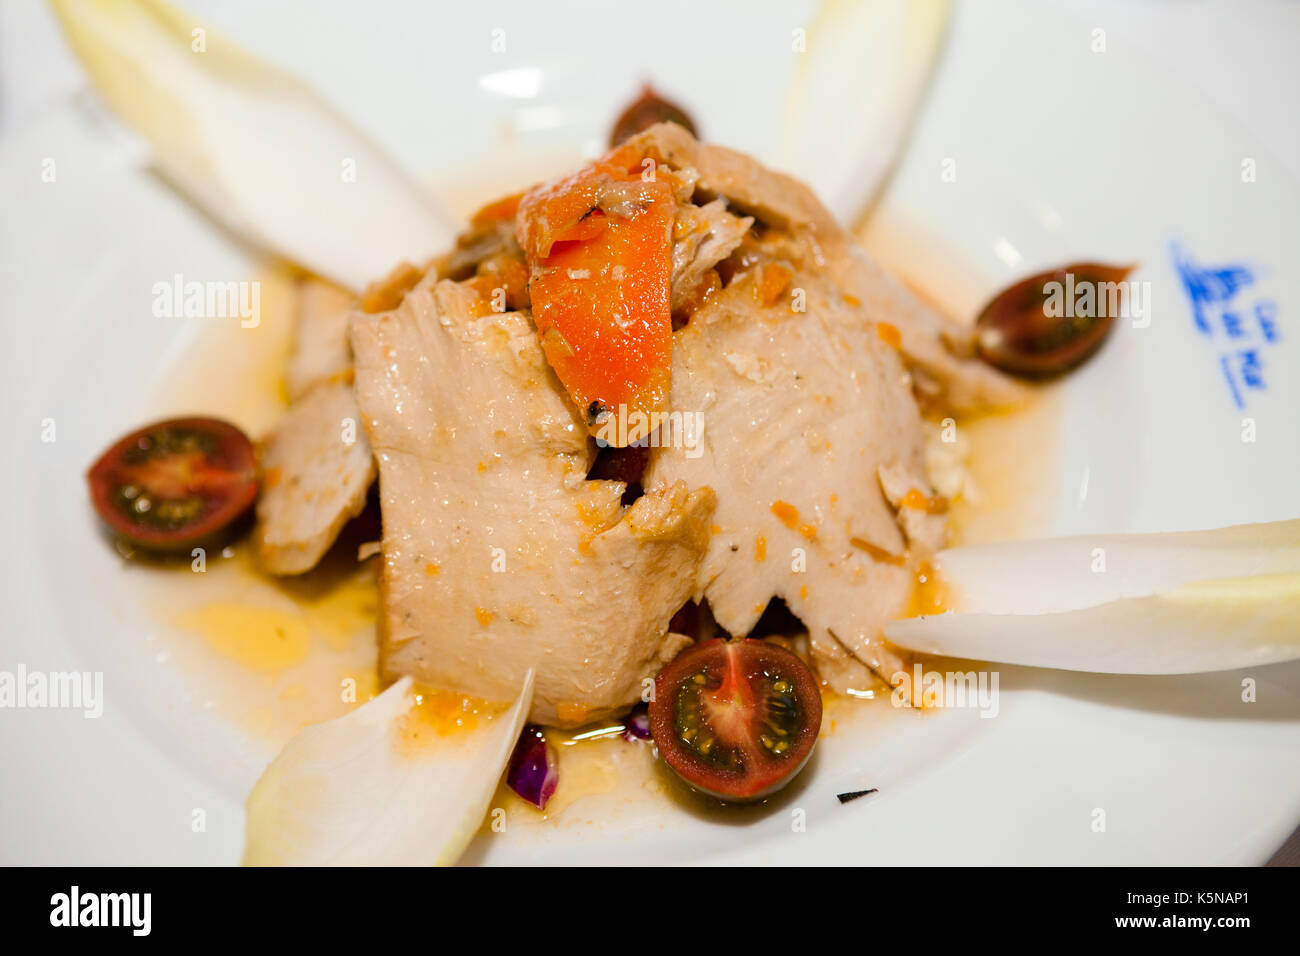 Tuna with tomatoes and carrot Stock Photo